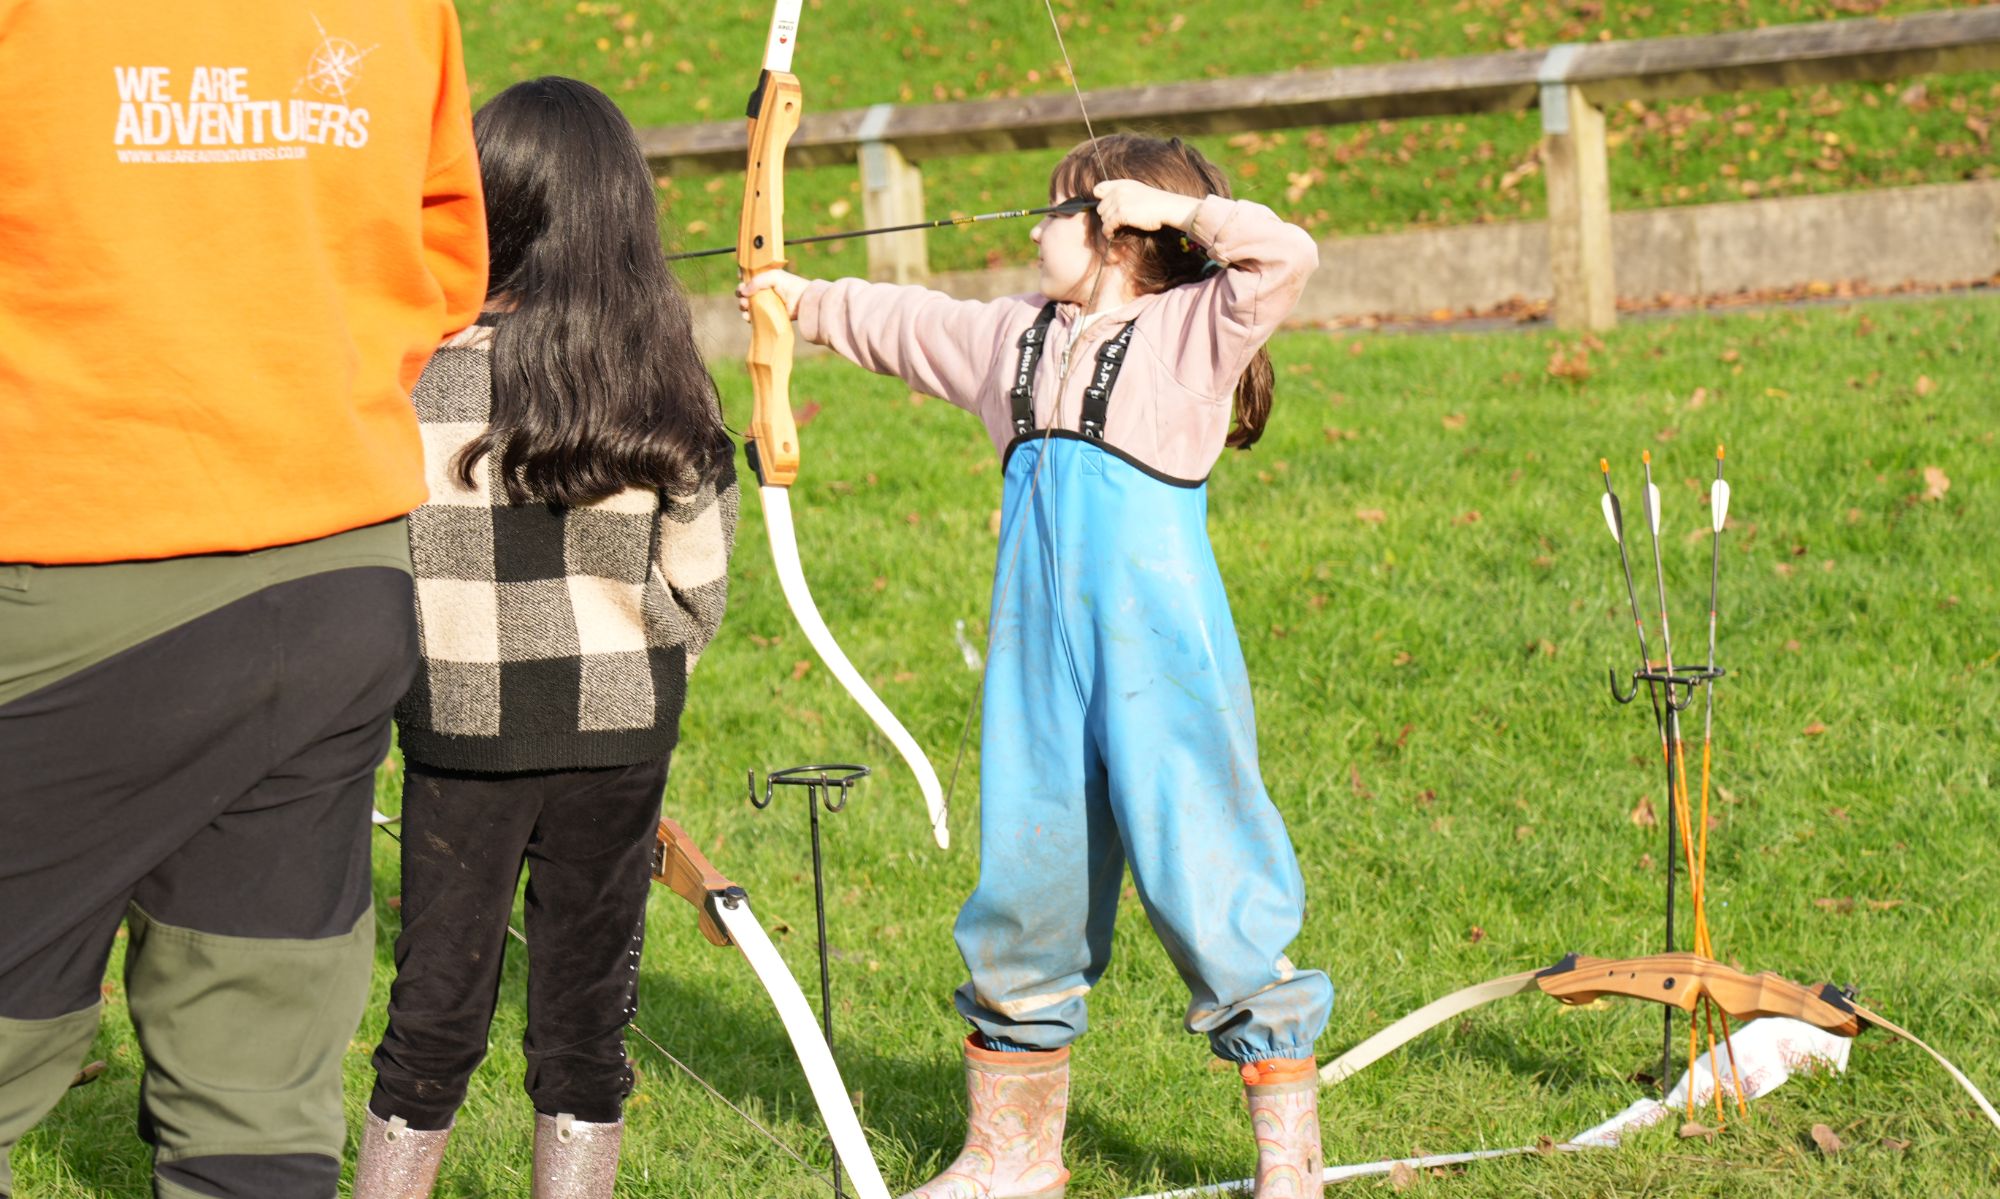 An image of a child taking part in an archery activity.